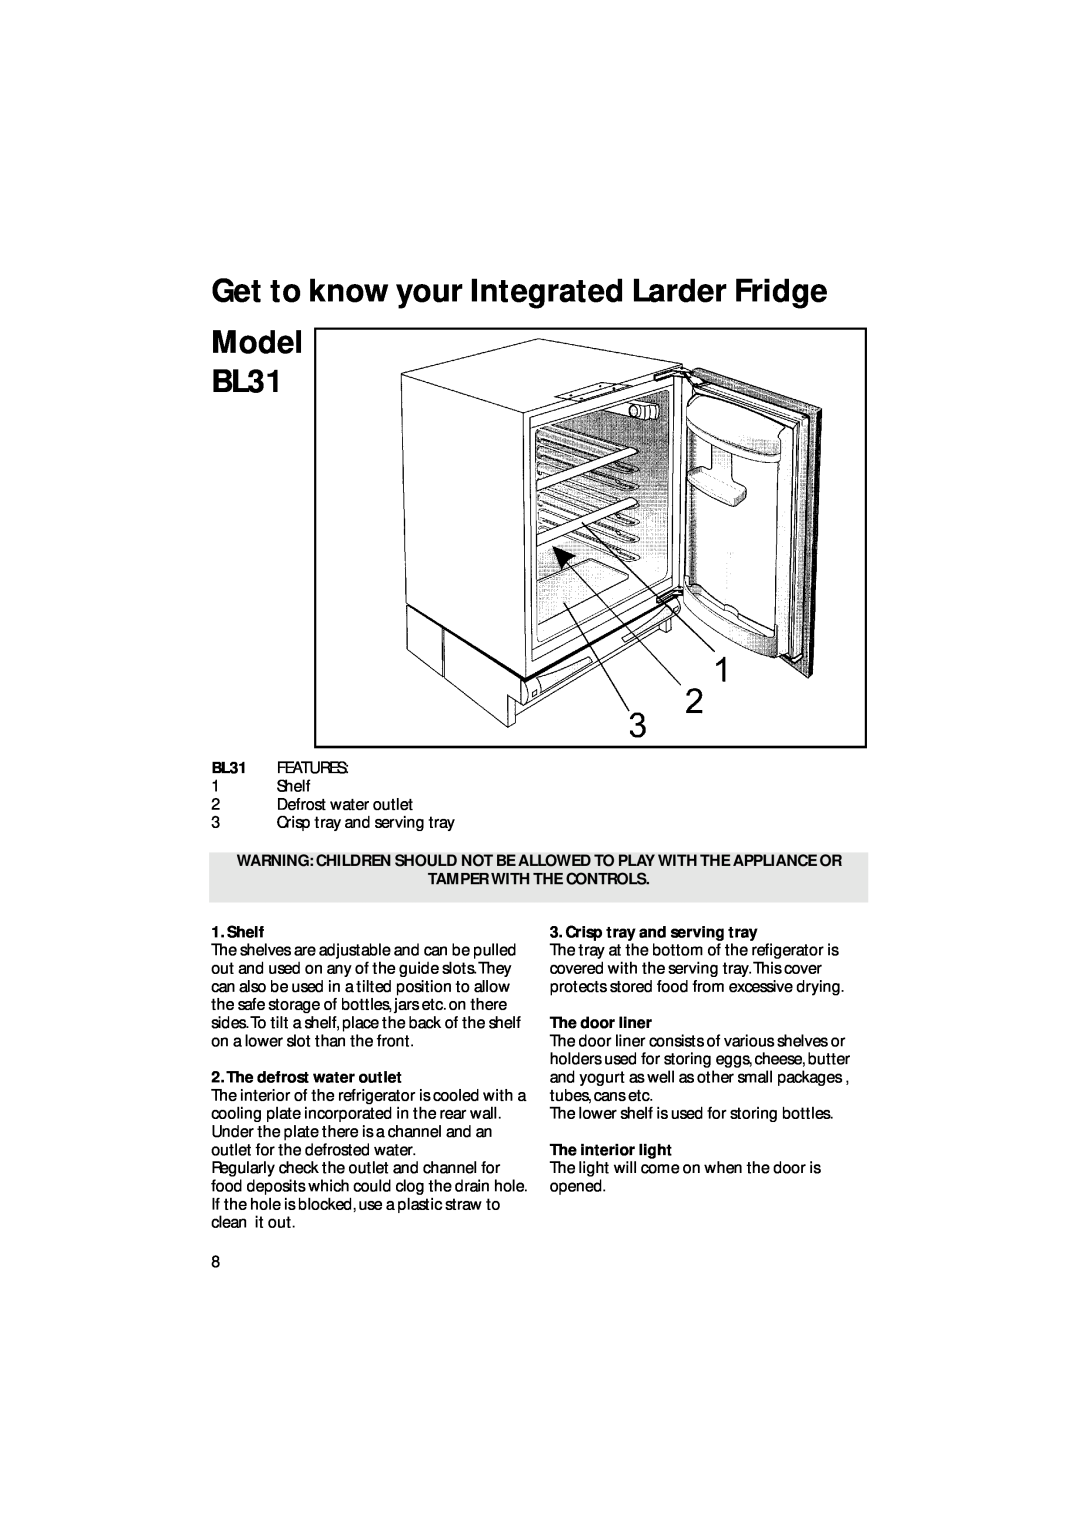 Hotpoint manual Get to know your Integrated Larder Fridge Model BL31, Tamper With The Controls, Shelf, The door liner 